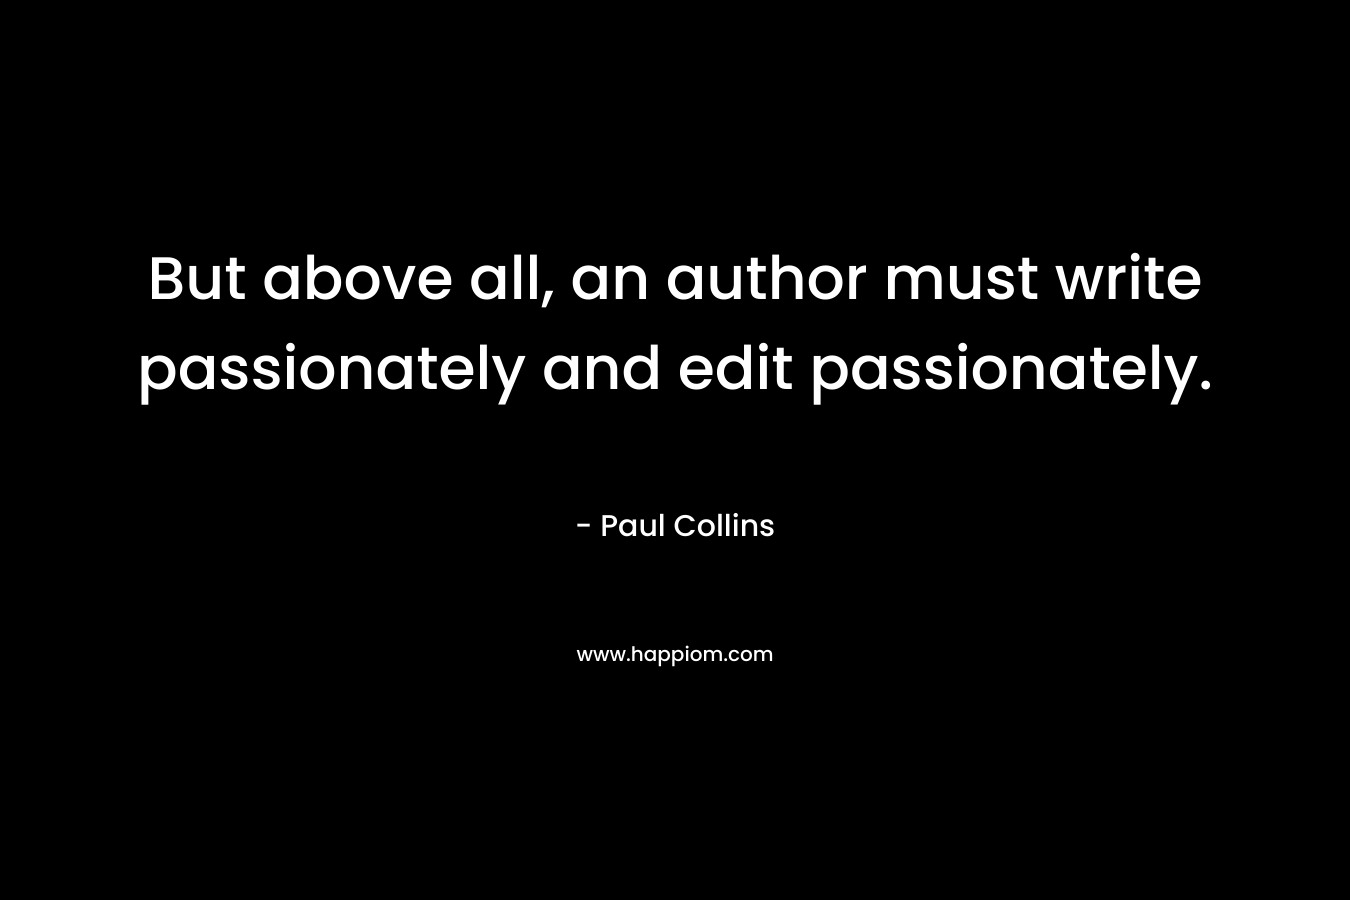 But above all, an author must write passionately and edit passionately. – Paul Collins